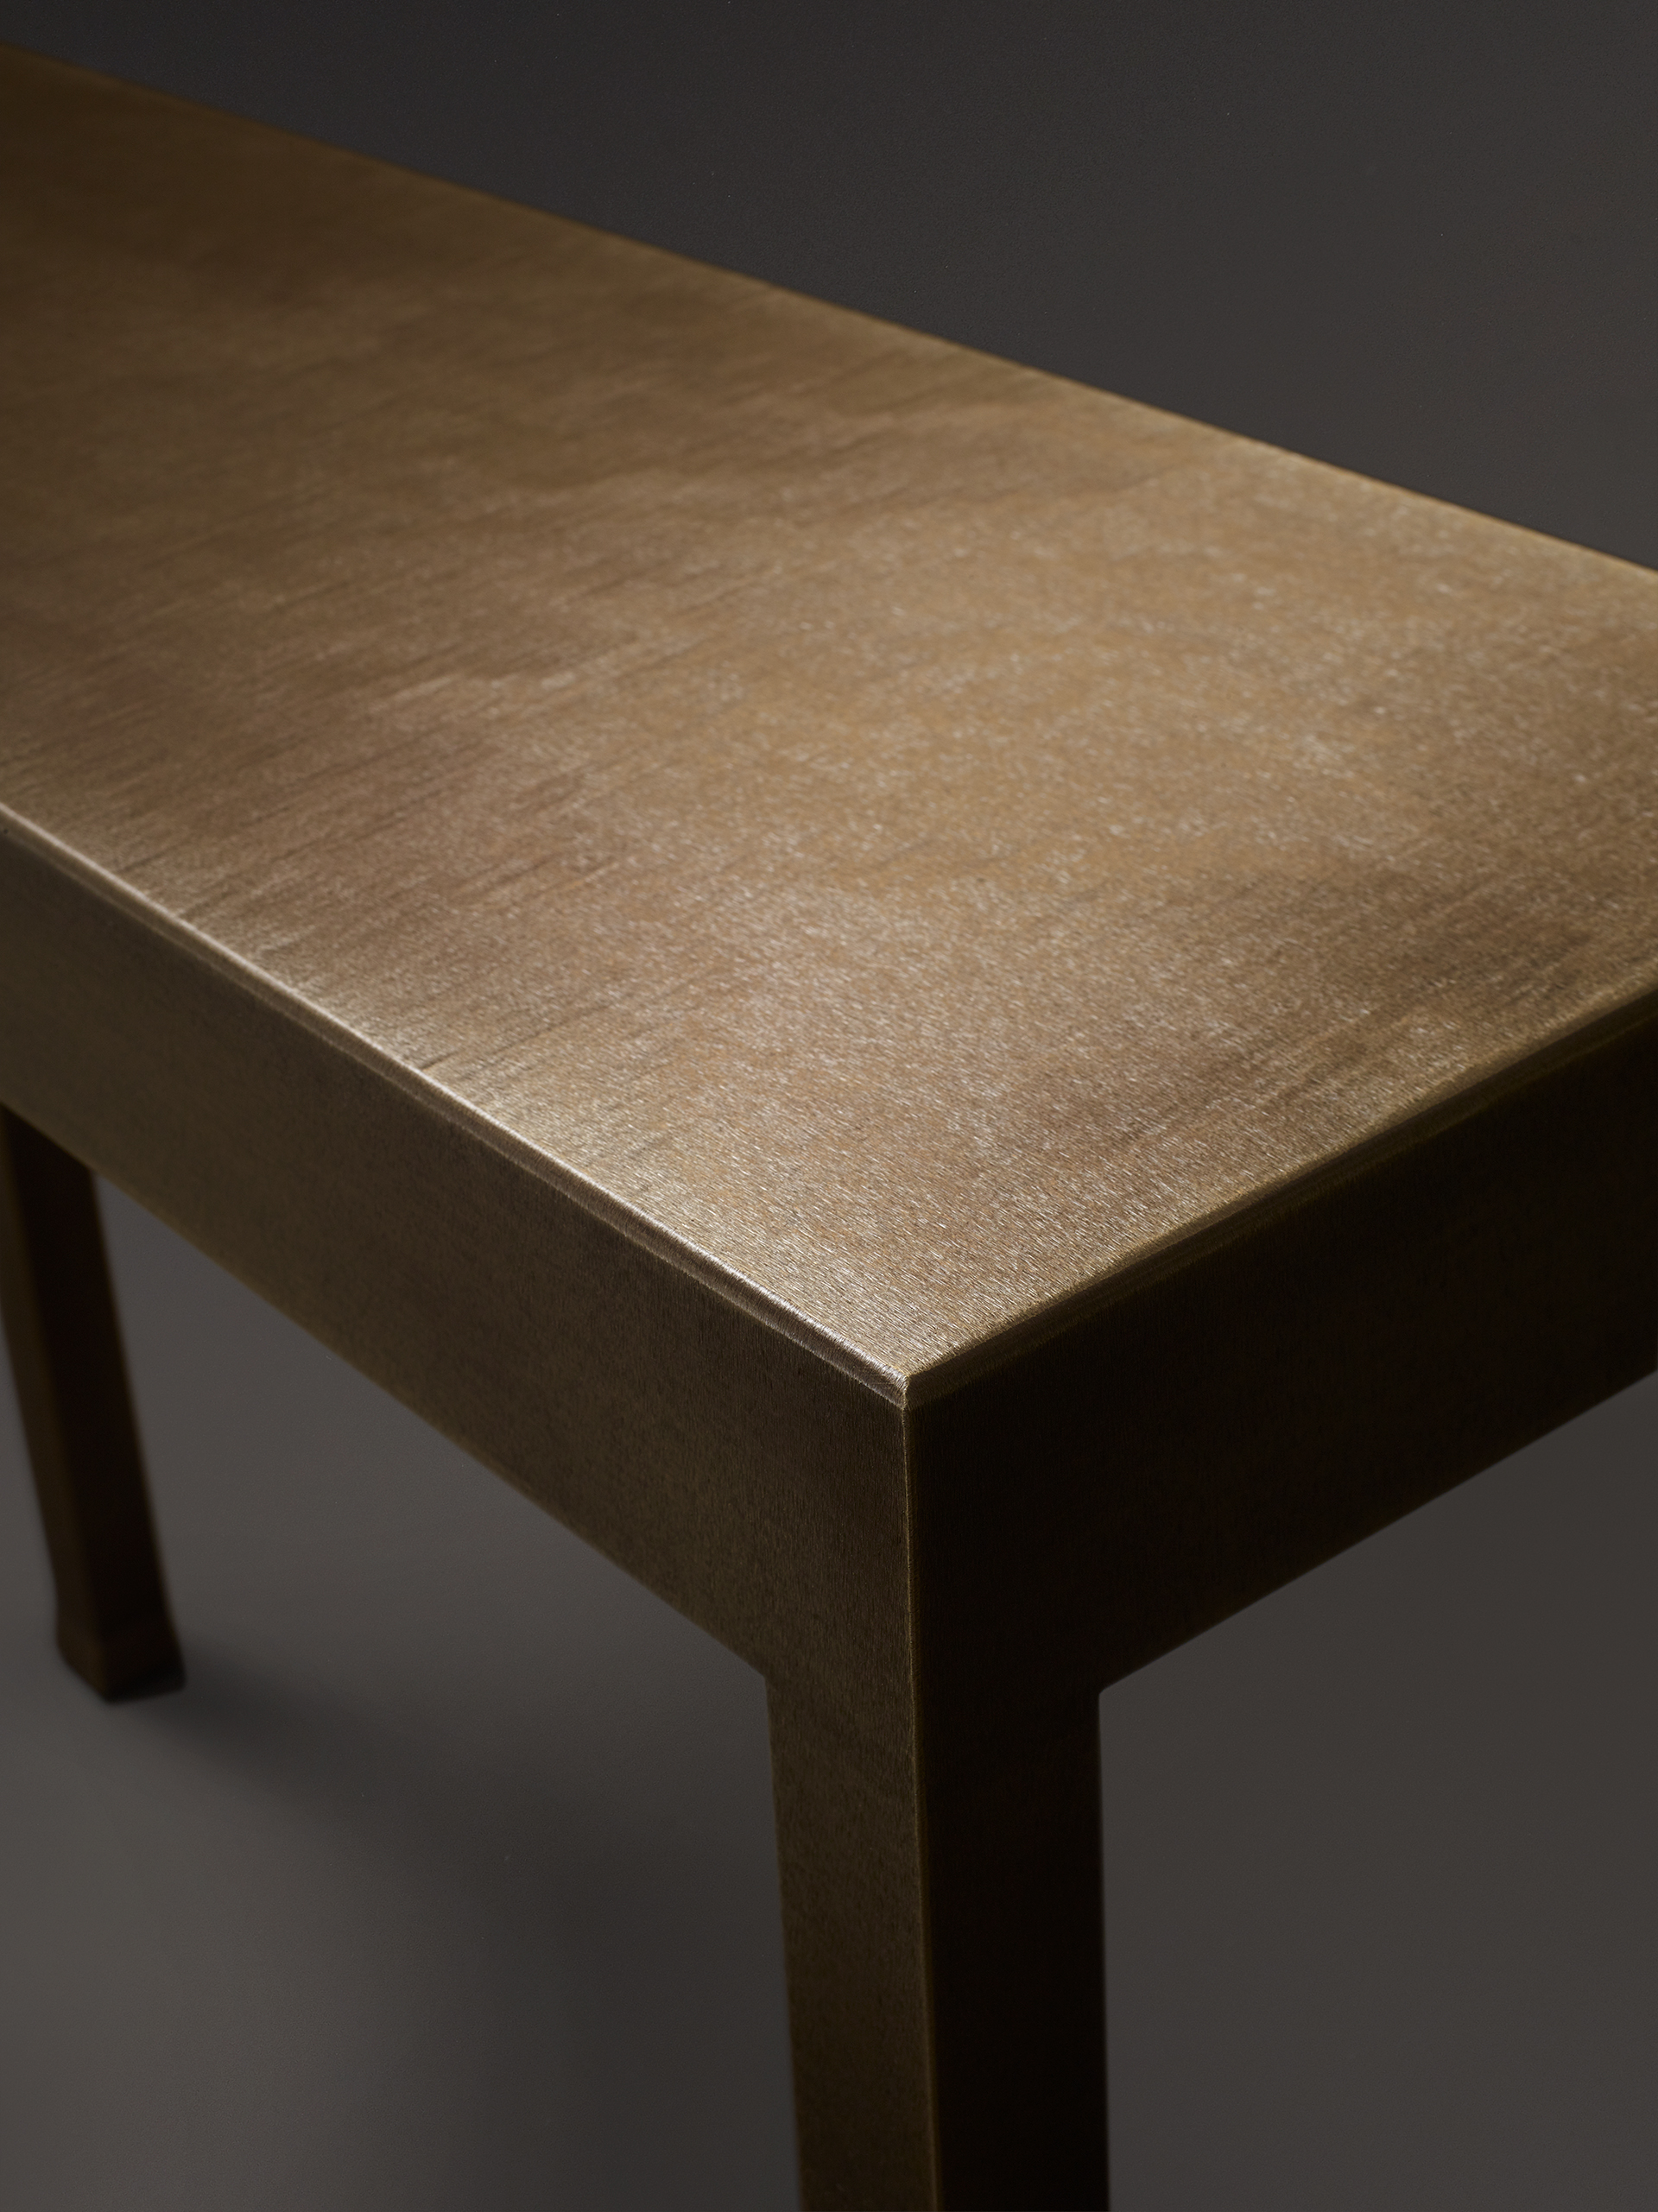 Detail of Gong, a bronze console from Promemoria's catalogue | Promemoria